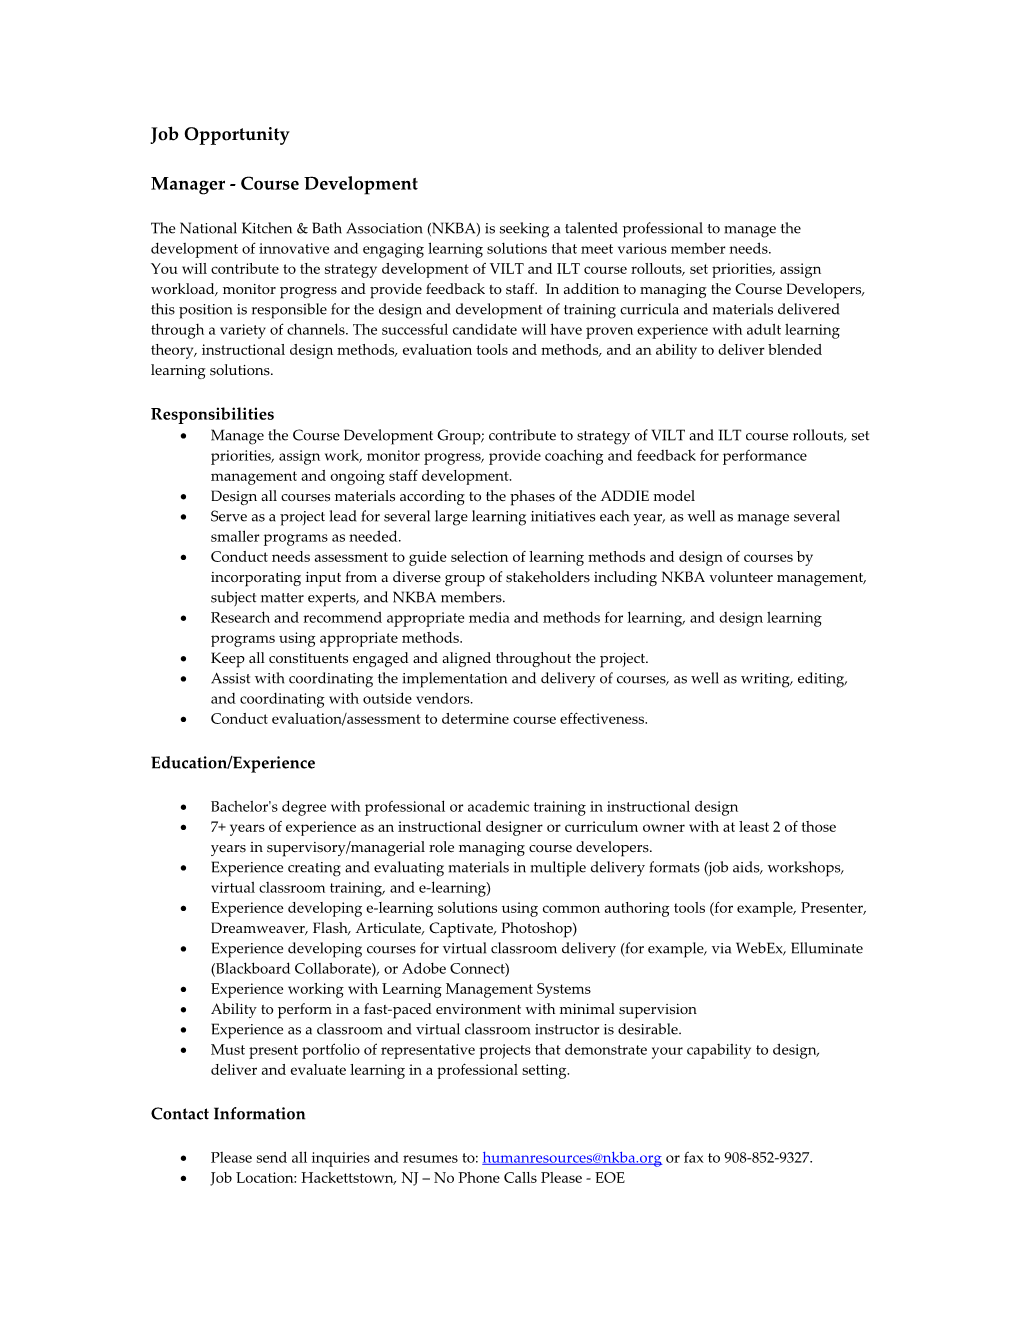 Manager - Course Development